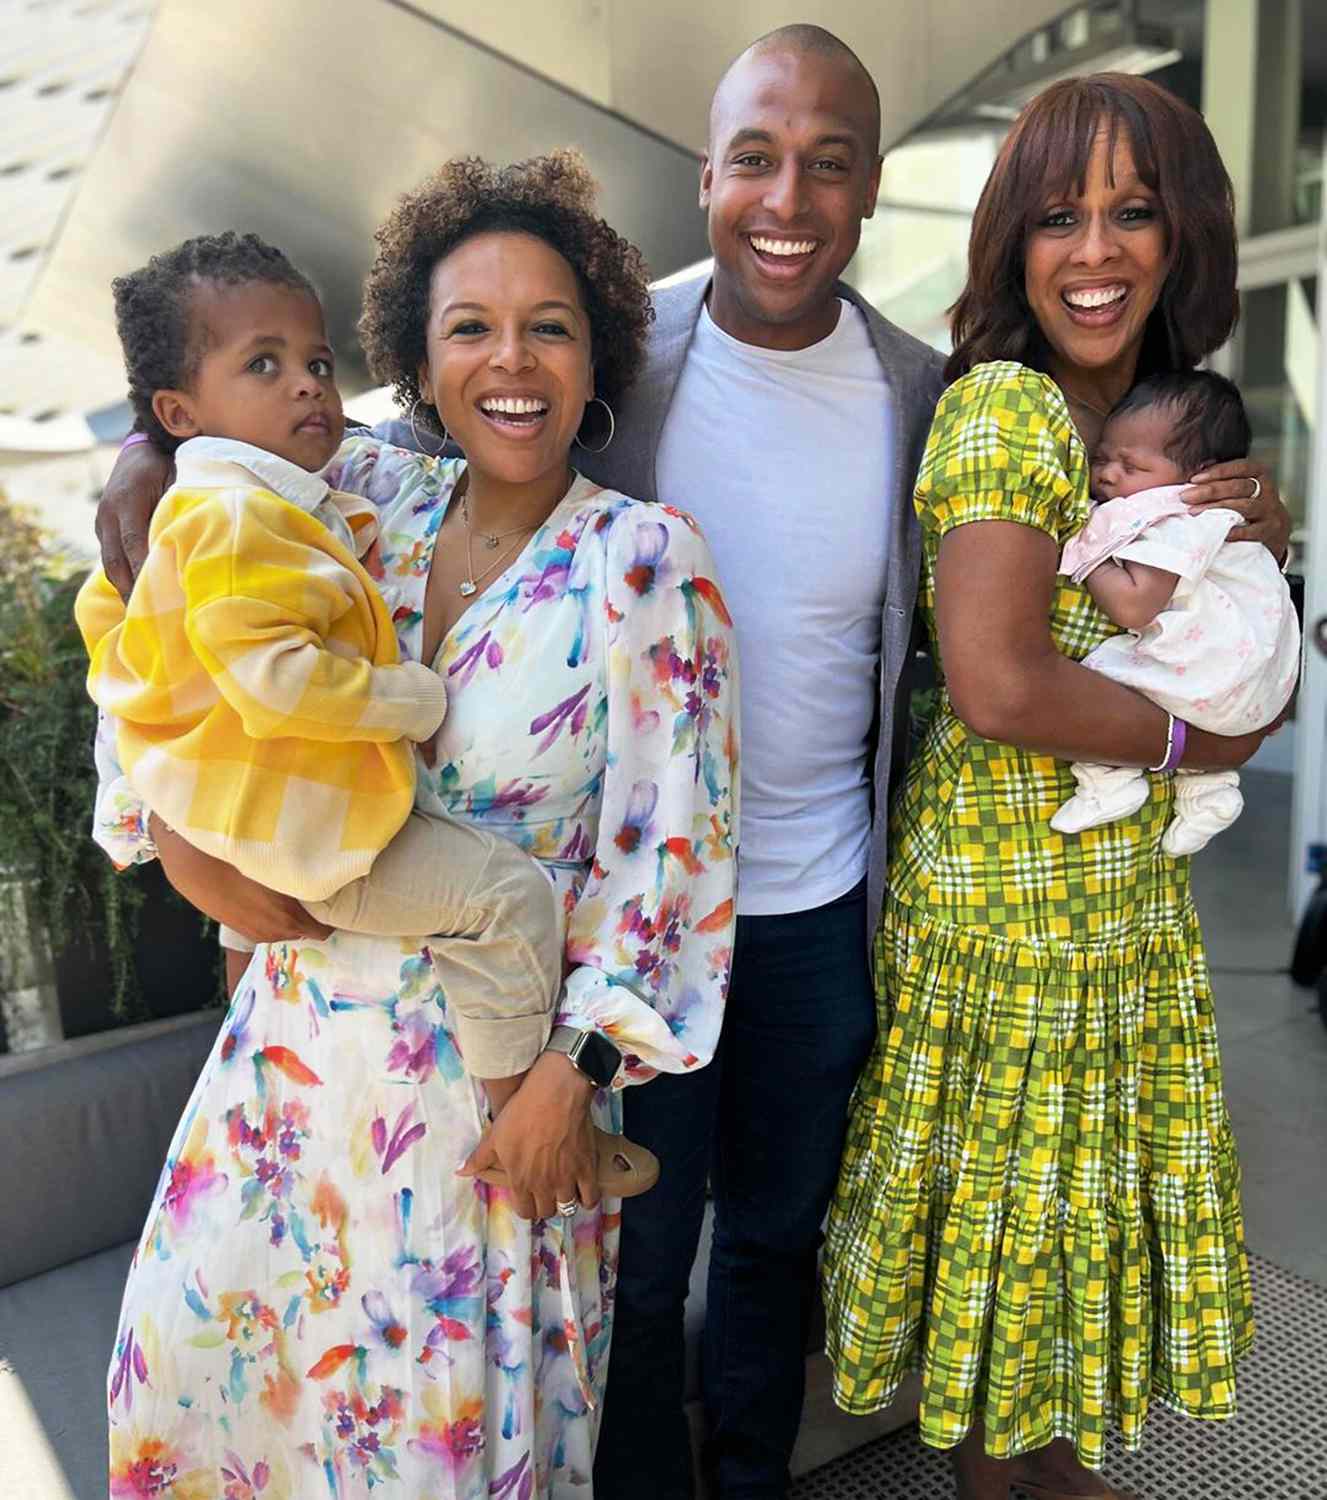 Gayle King (right) poses with Kirby Bumpus (second left), William Bumpus Jr. and grandchildren Luca and Grayson